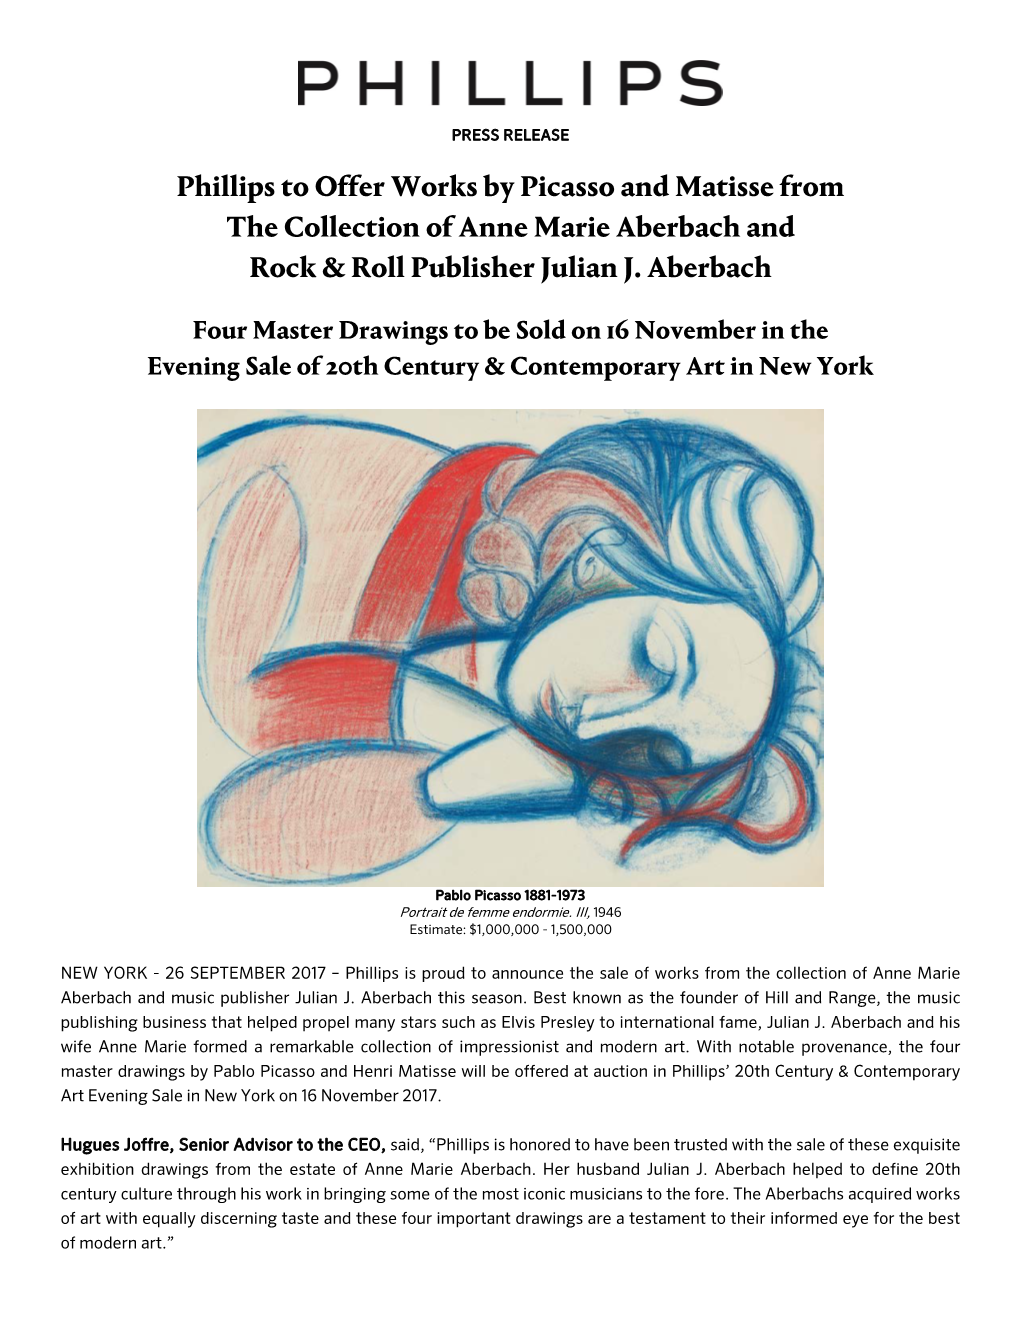 Phillips to Offer Works by Picasso and Matisse from the Collection of Anne Marie Aberbach and Rock & Roll Publisher Julian J